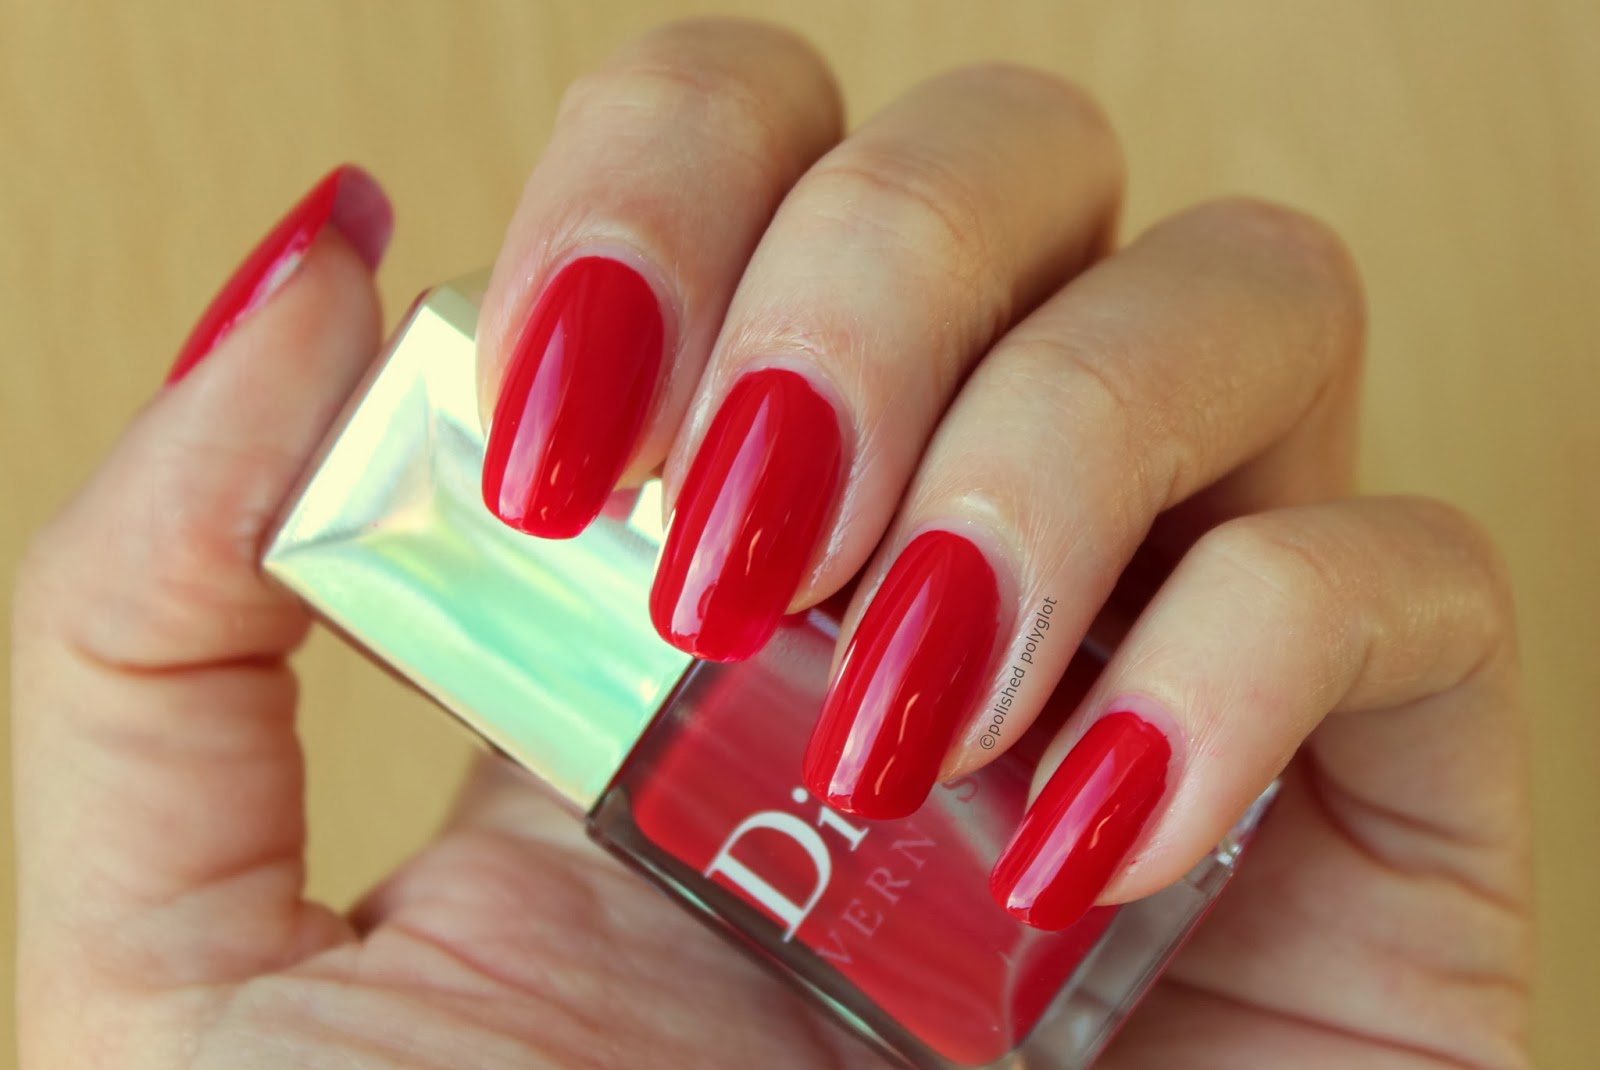 10. Dior Vernis Nail Polish in "Rouge 999" - wide 2